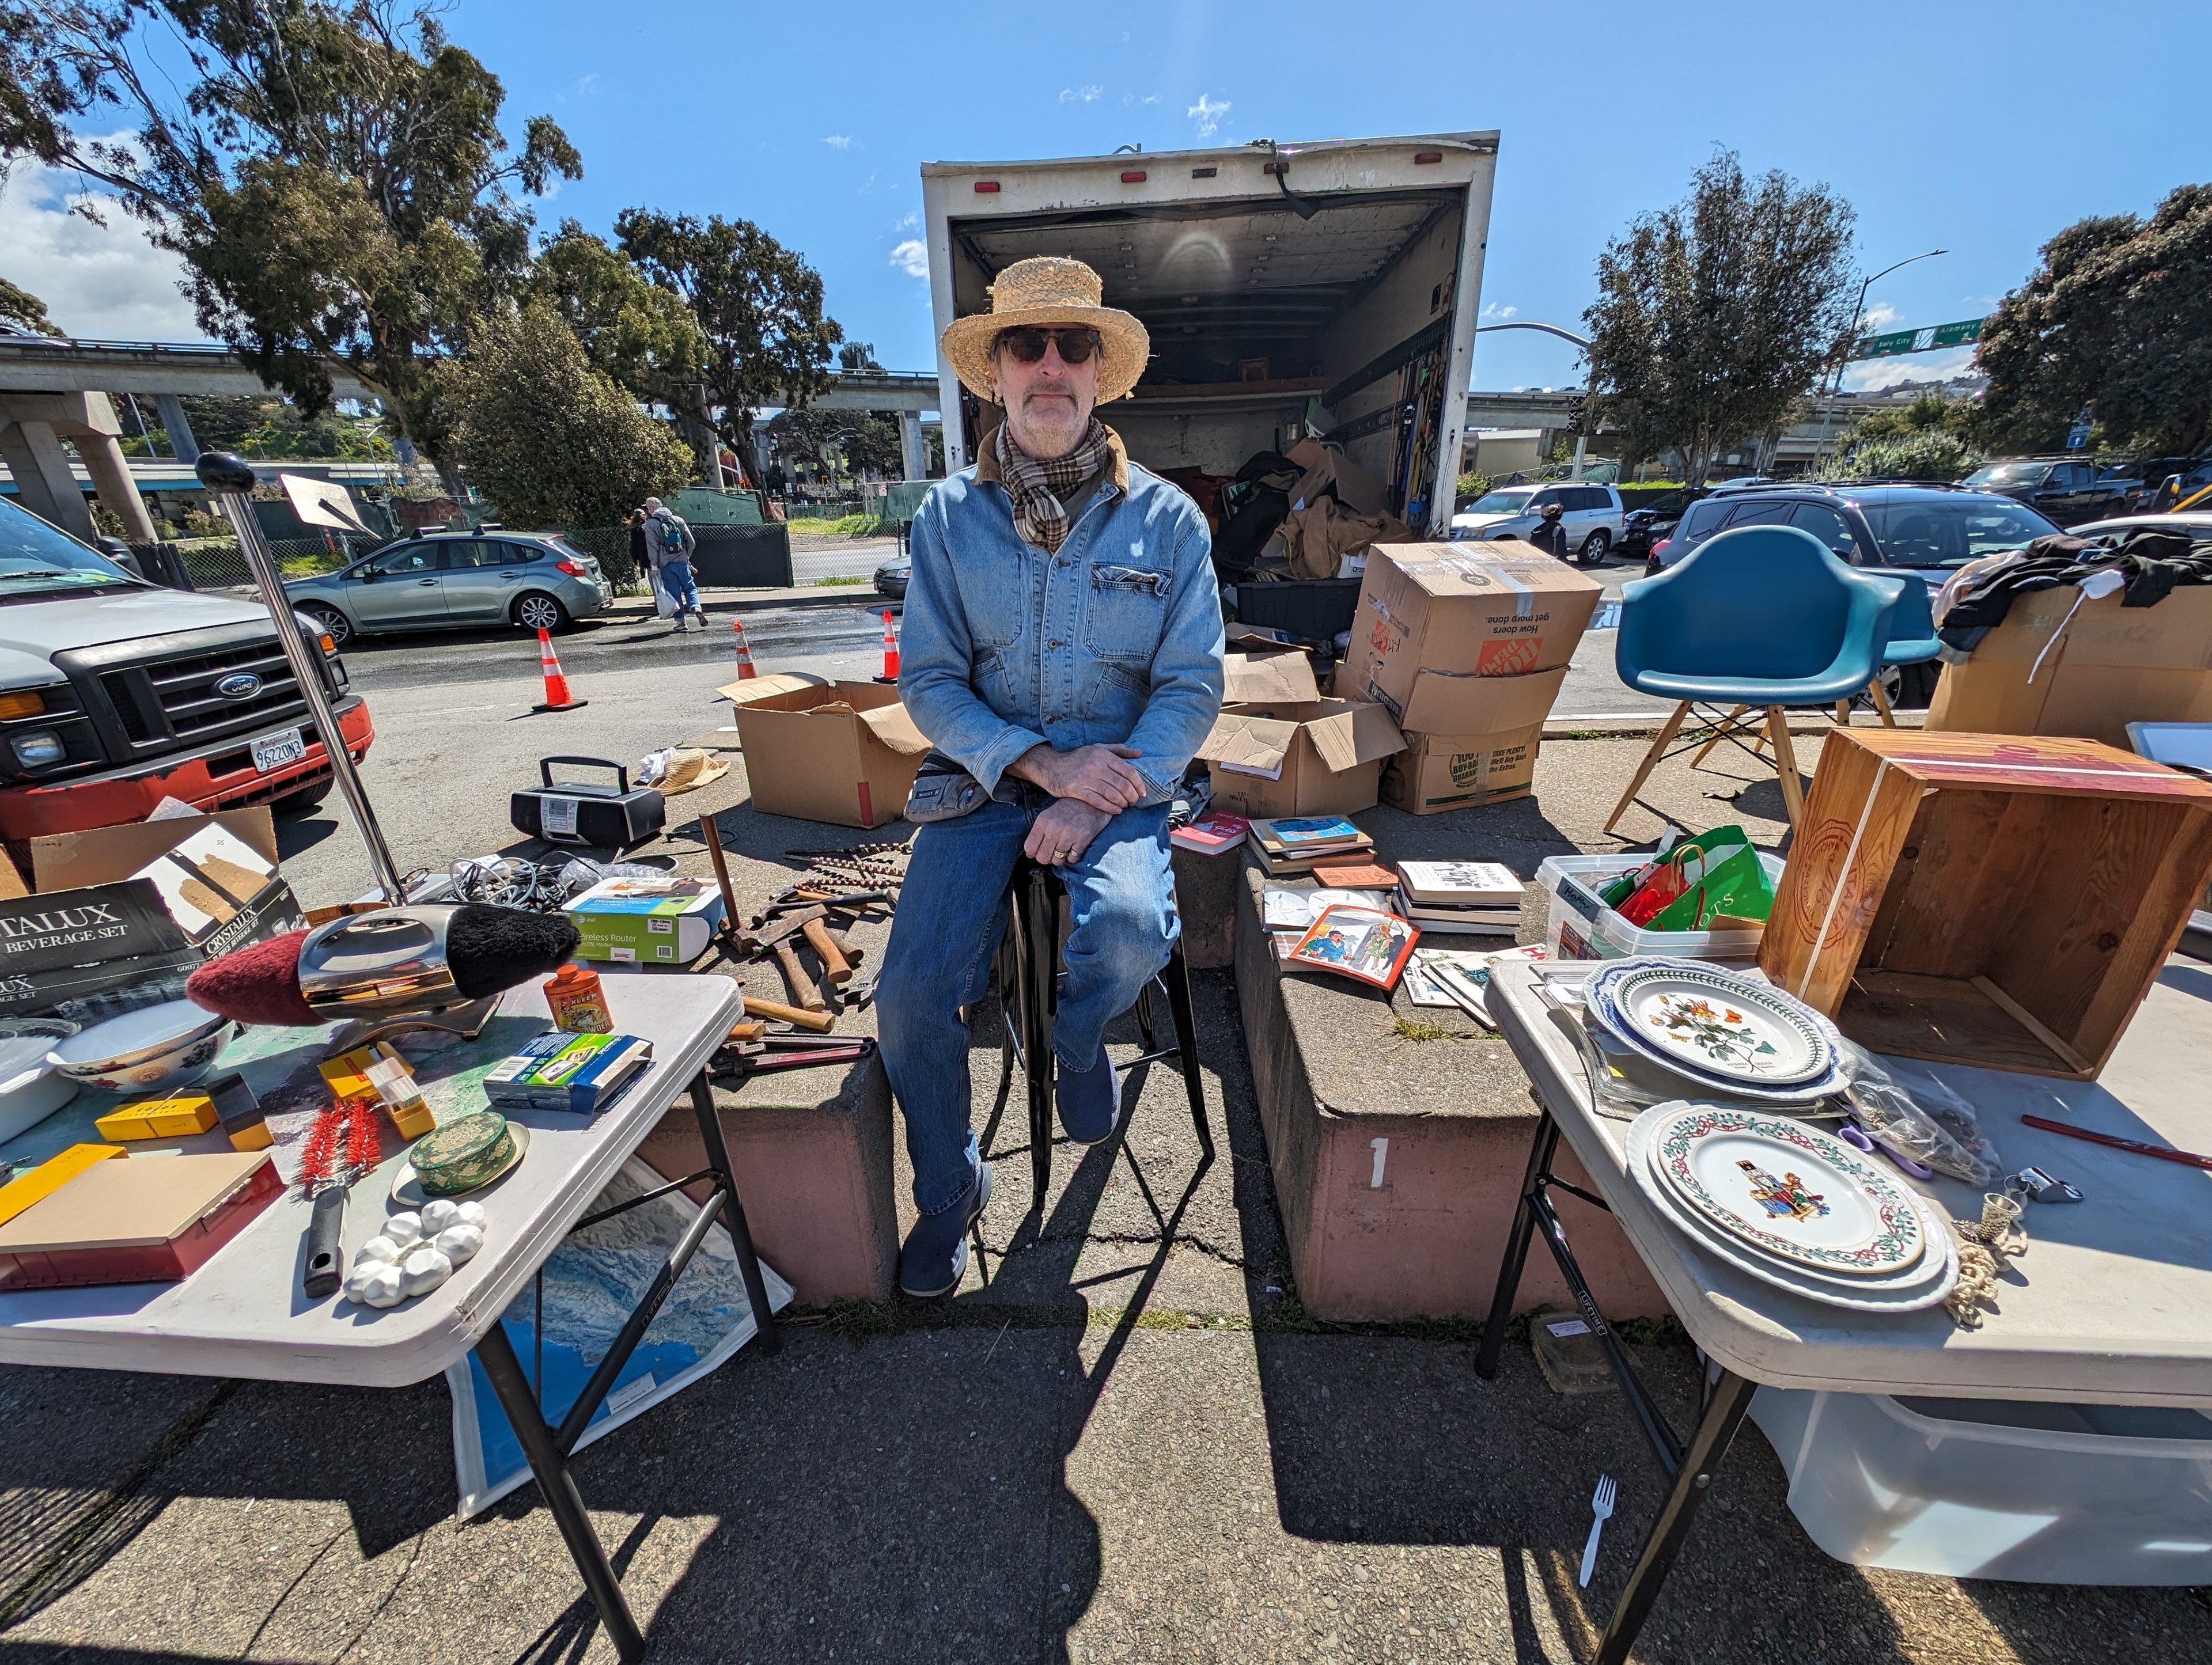 A man wearing sunglasses, a straw hat and denim jacket and jeans sits on a stool surrounded by vintage goods for sale.